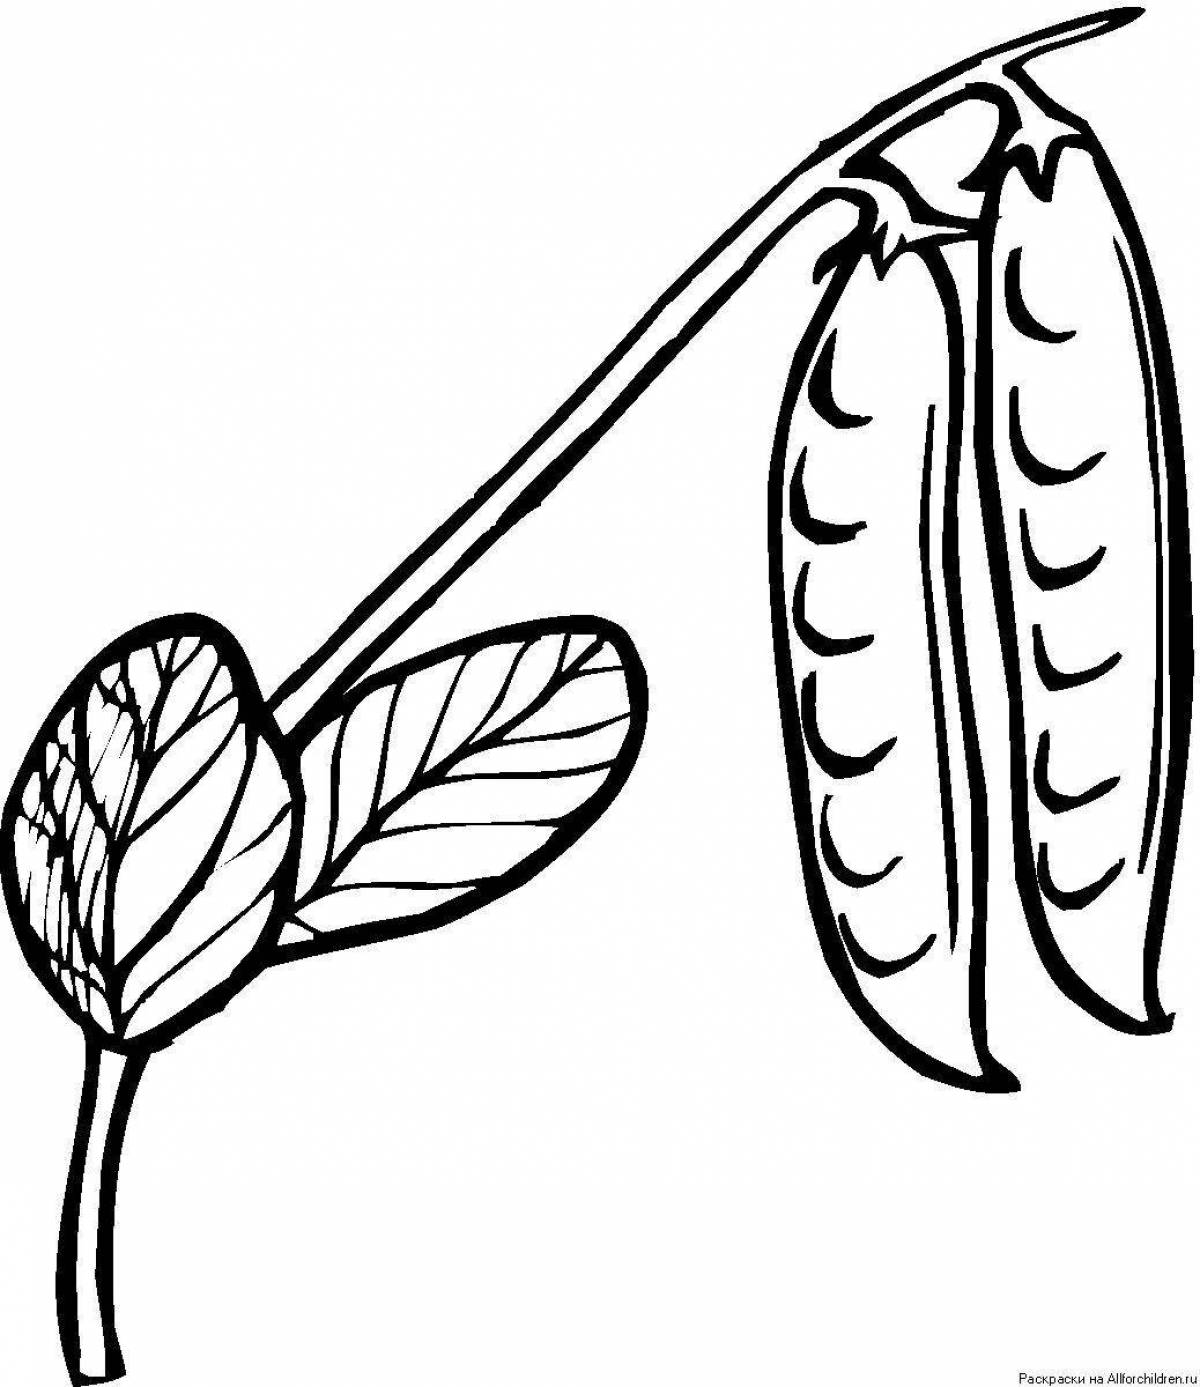 Outstanding baby bean coloring page